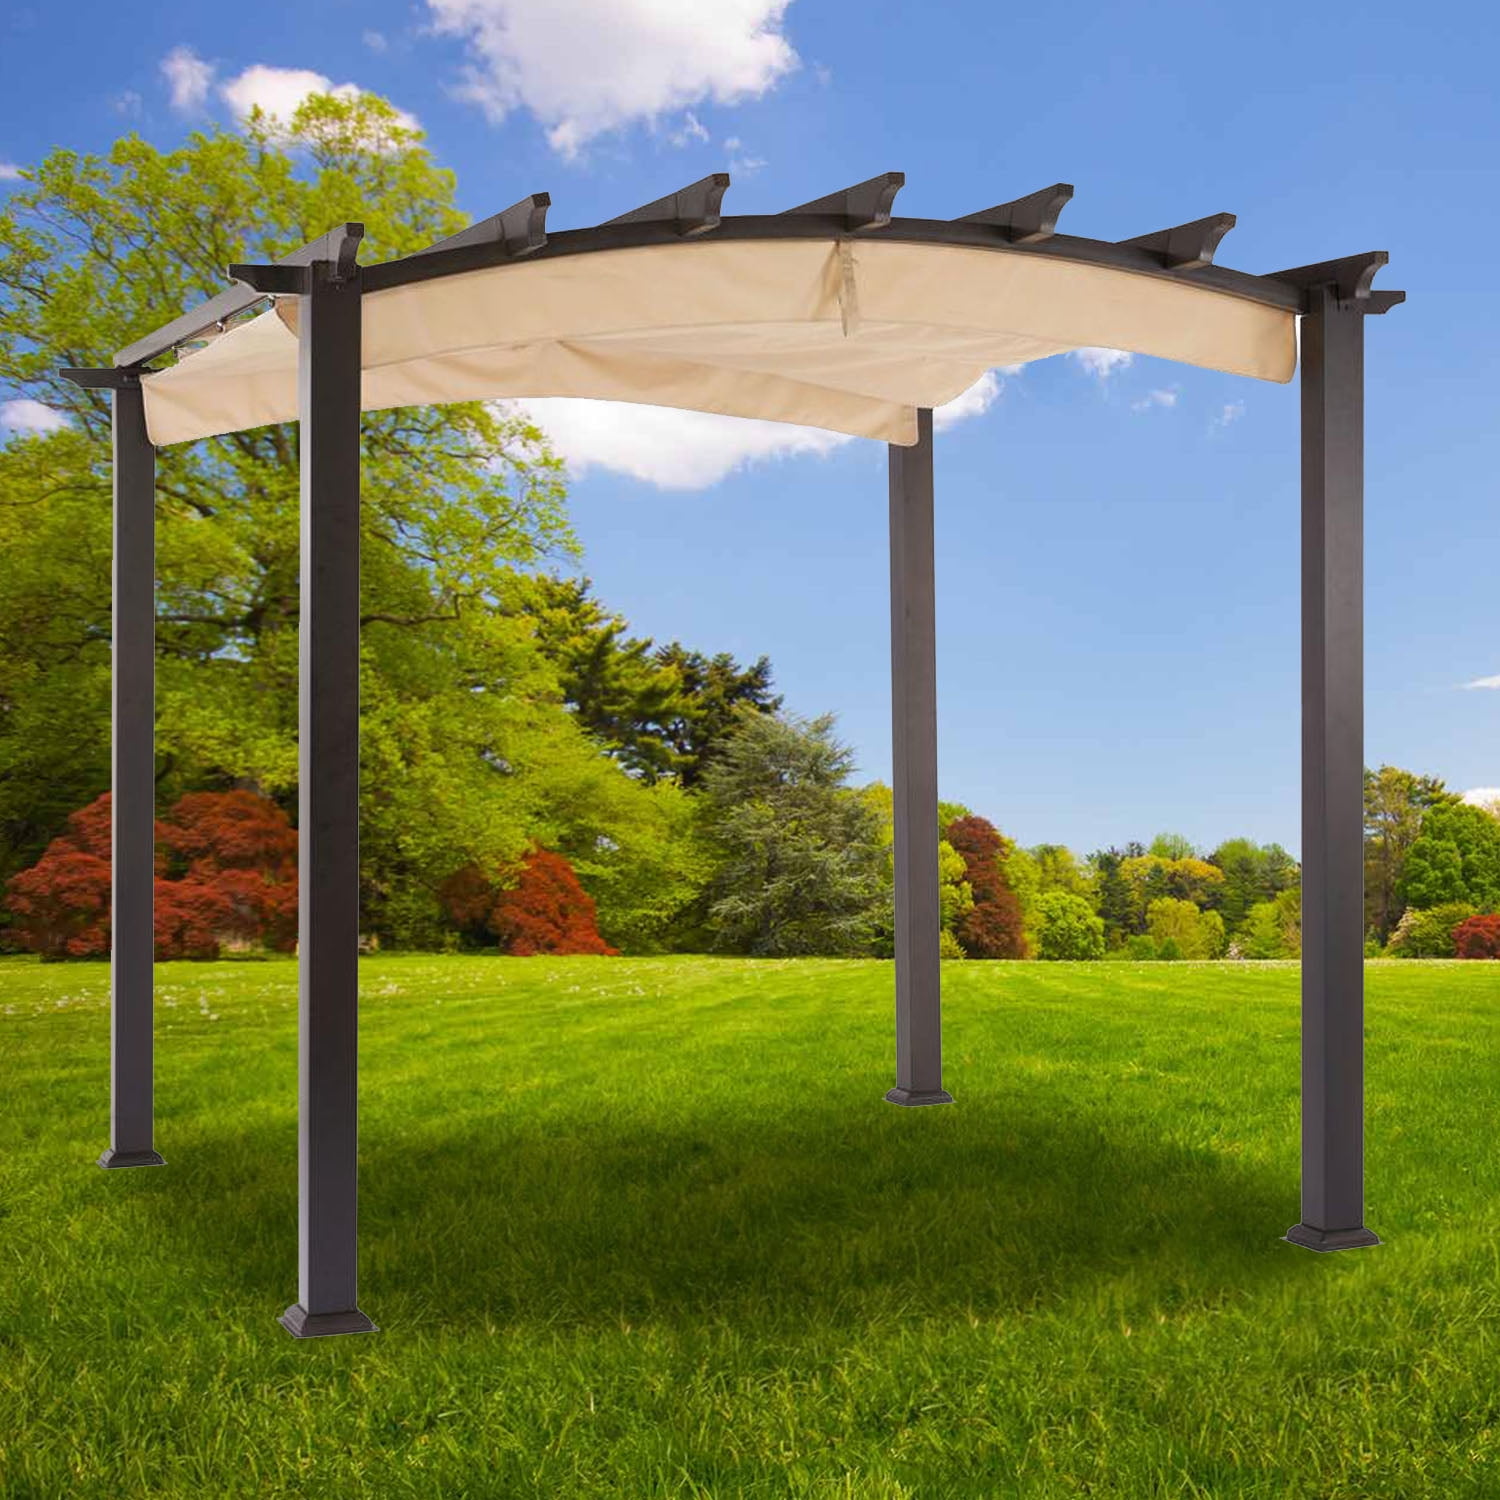 Garden Winds Replacement Canopy Top For The Arched Pergola Beige